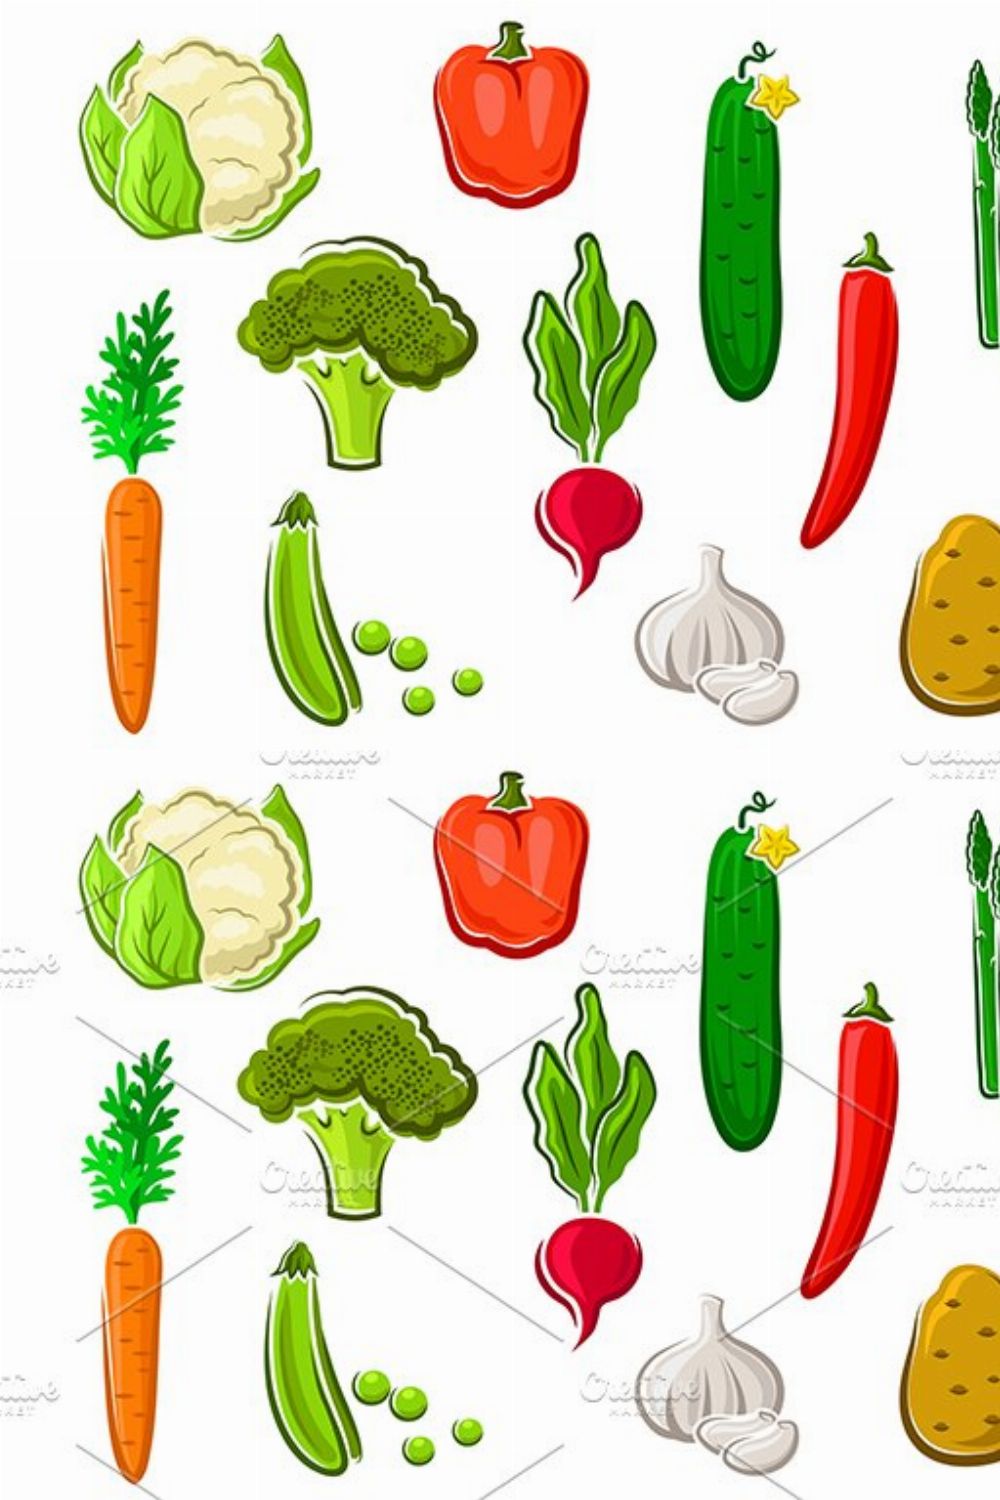 Natural healthy vegetables pinterest preview image.